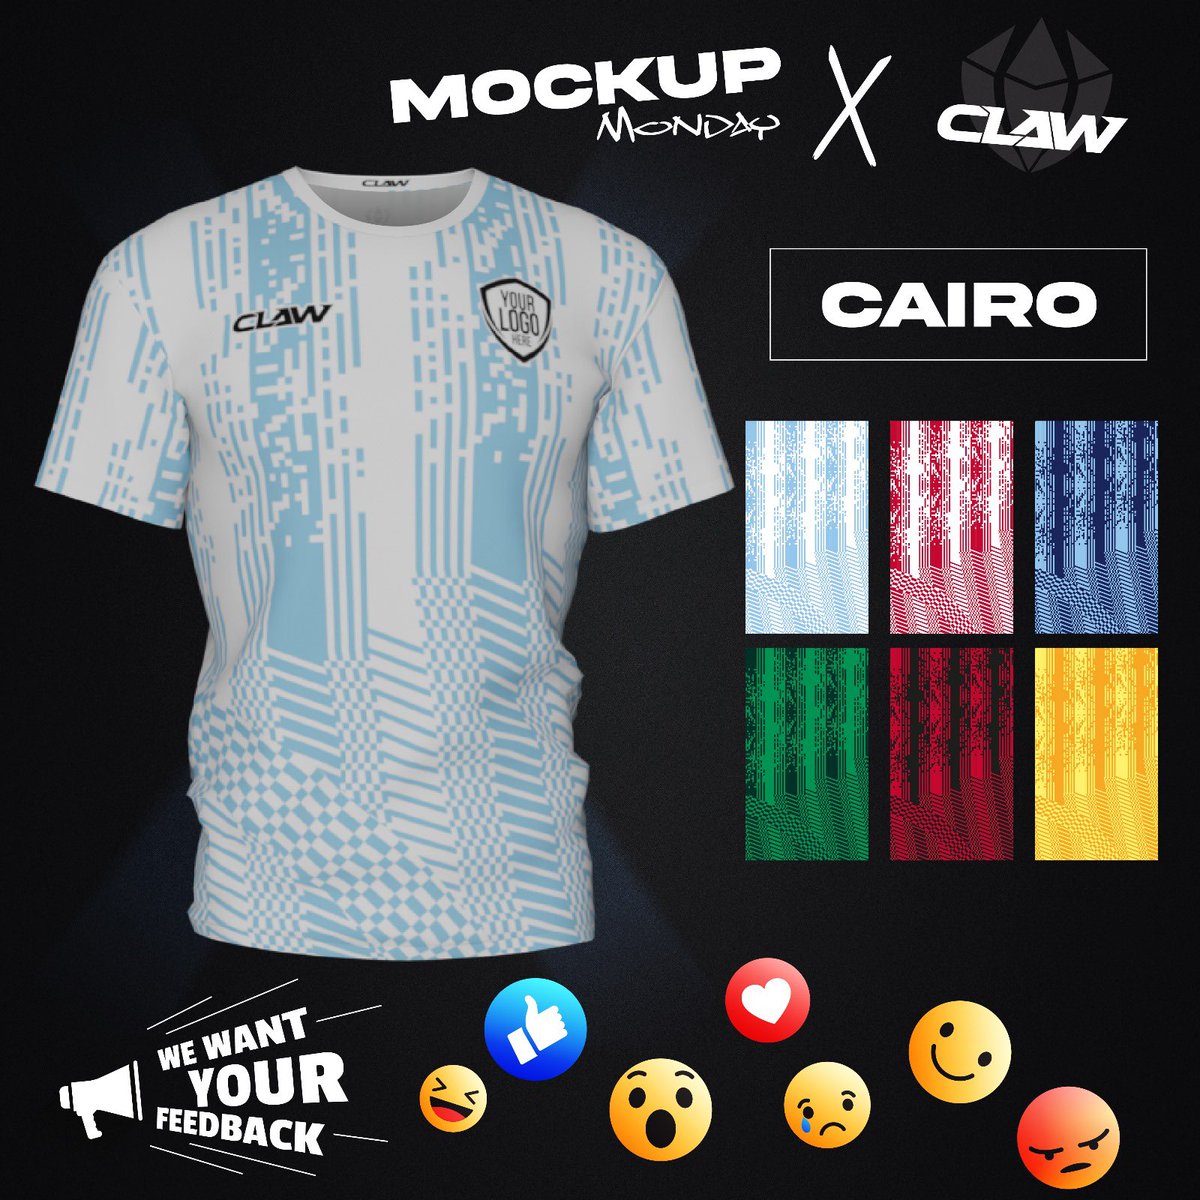 Introducing Mock-Up Monday! 🎉 Each Monday, we'll unveil a fresh shirt design. Simply give us a thumbs up or down to let us know what you think! Want to see the designs in your team's colors? Email us at sales@pictonsports.co.uk. 🌈 #MockUpMonday #TeamColors